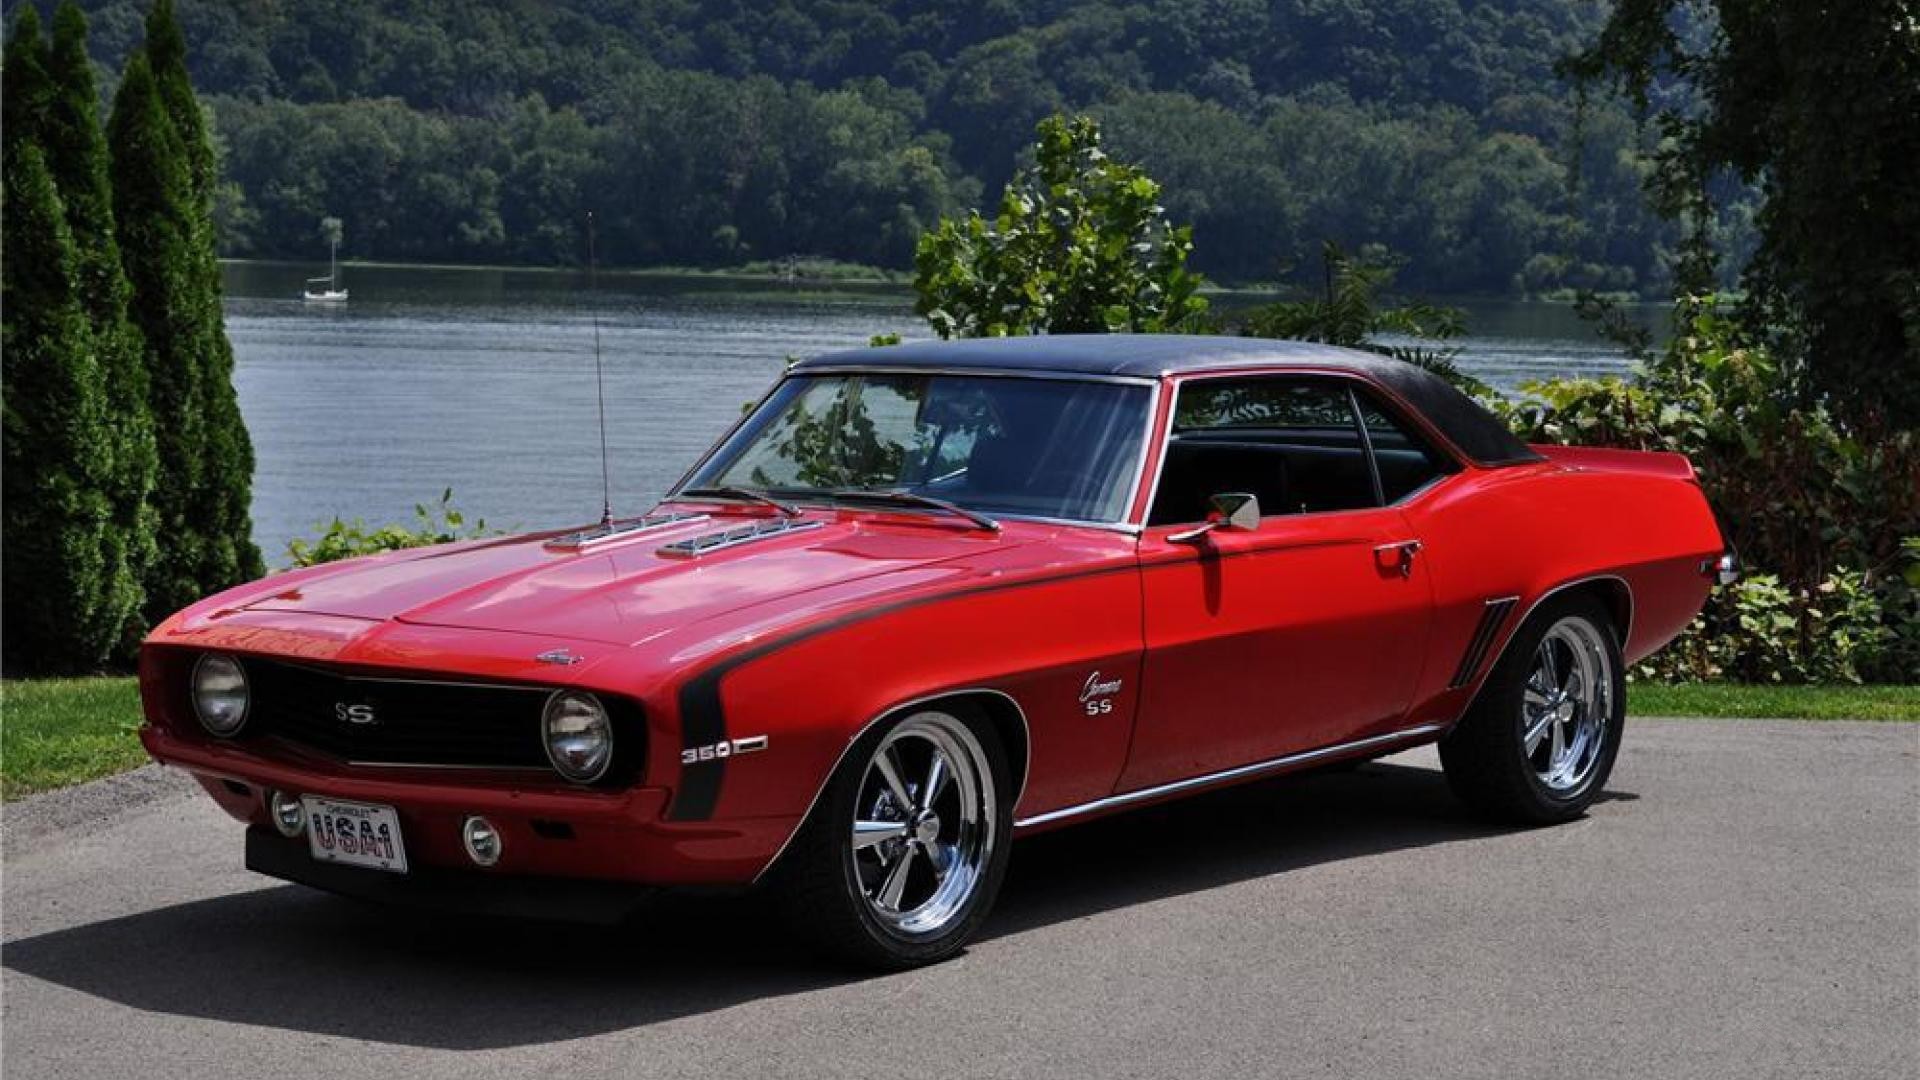 Chevrolet Camaro 1969 front view exterior black coupe retro cars  american sports cars HD wallpaper  Peakpx